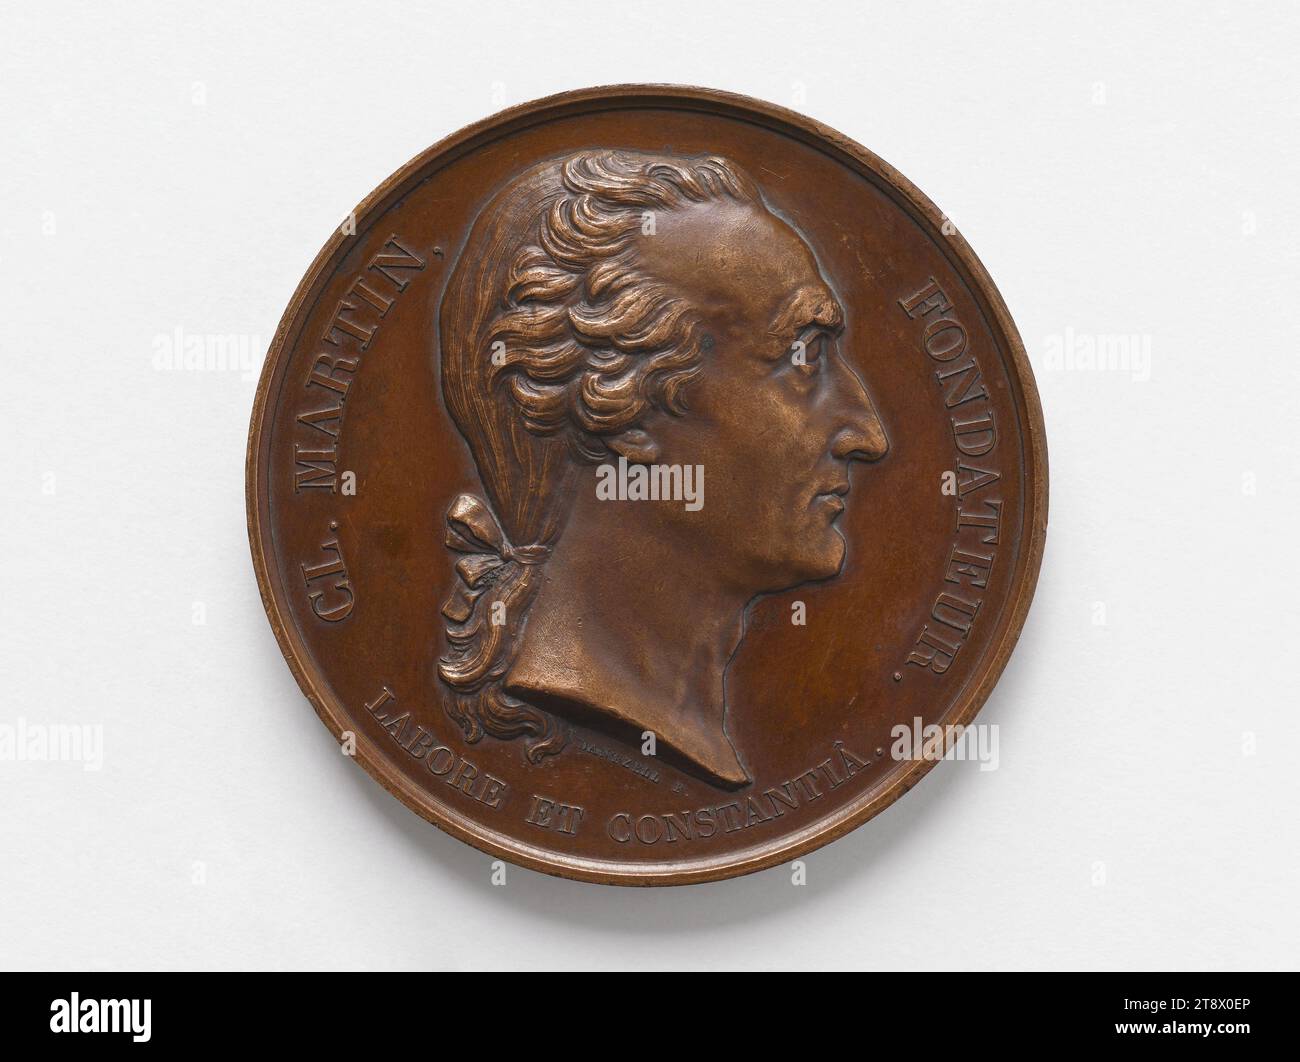 Claude Martin (1735-1800), French soldier of the French East India Company, then general of the English East India Company, founder of the La Martinière schools, 1851, Dantzell, Joseph, Engraver in medals, In 1851, Numismatics, Medal, Dimensions - Work: Diameter: 5 cm, Weight (type dimension): 64.21 g Stock Photo